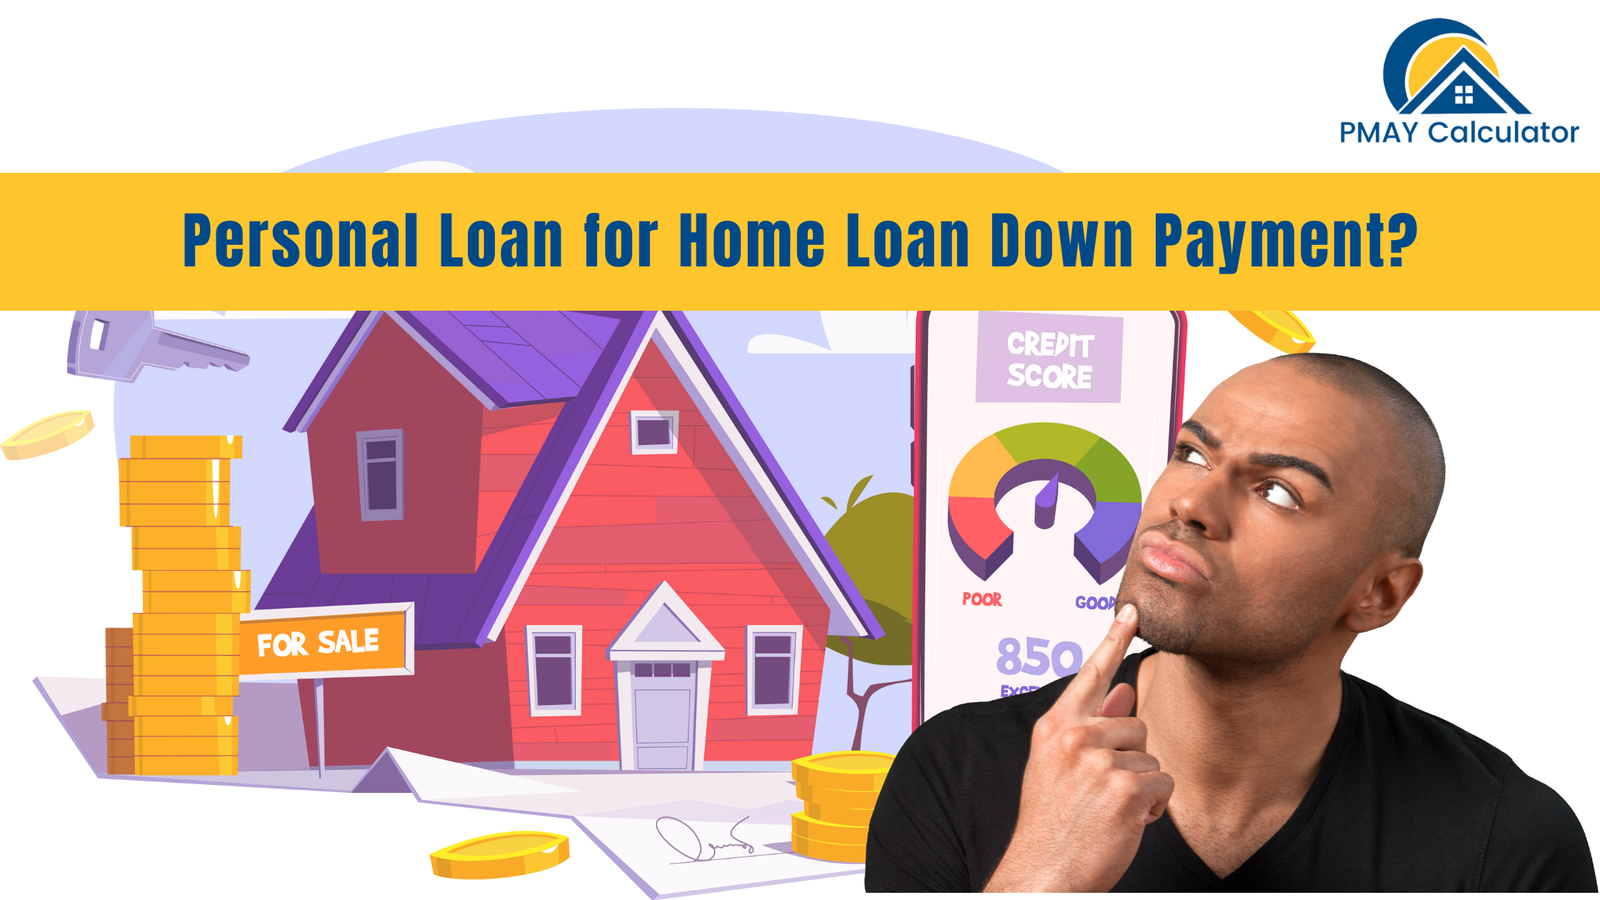 Personal loan for downpayment of home